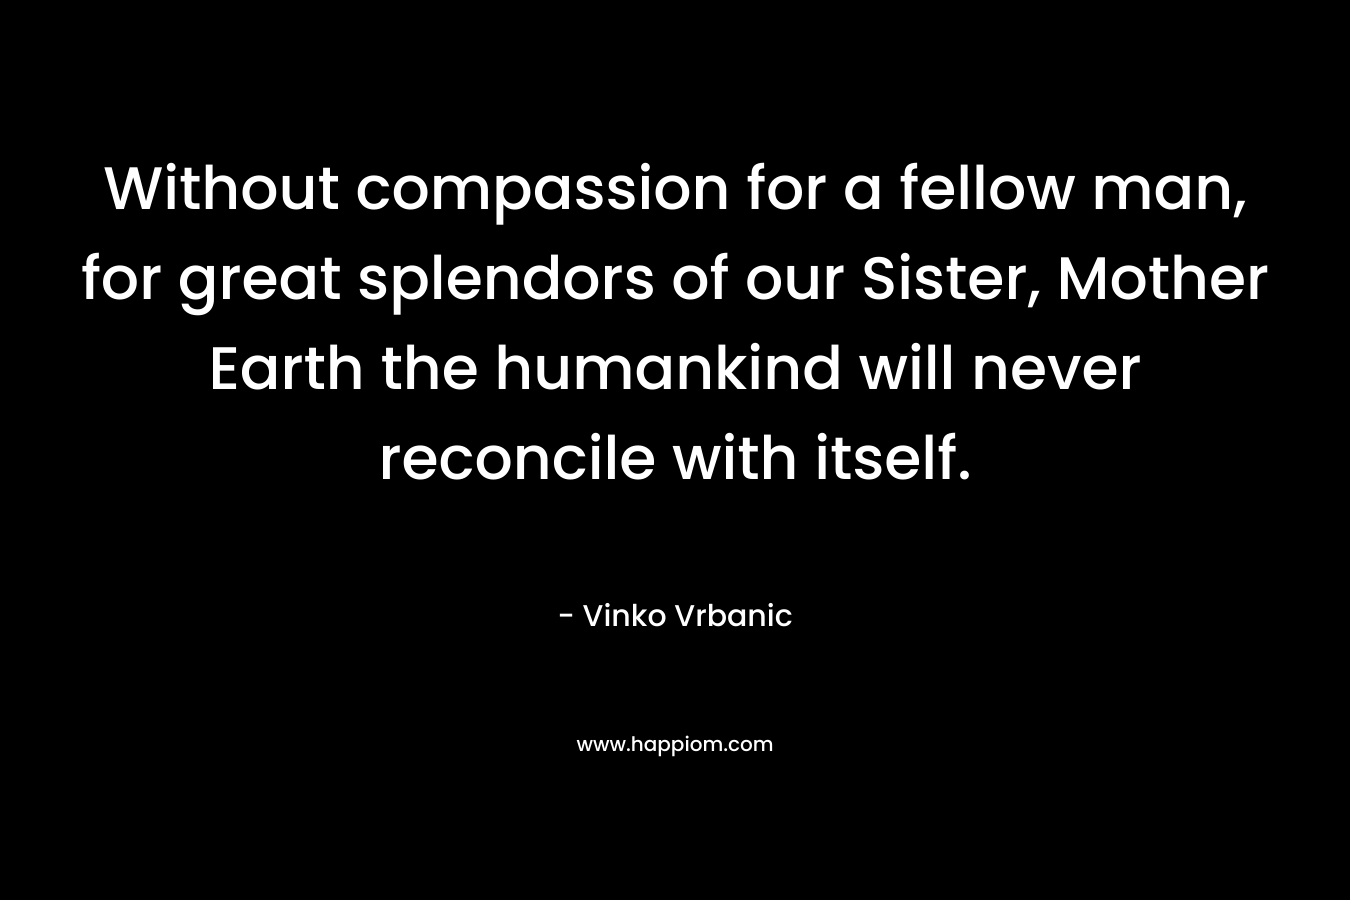 Without compassion for a fellow man, for great splendors of our Sister, Mother Earth the humankind will never reconcile with itself. – Vinko Vrbanic